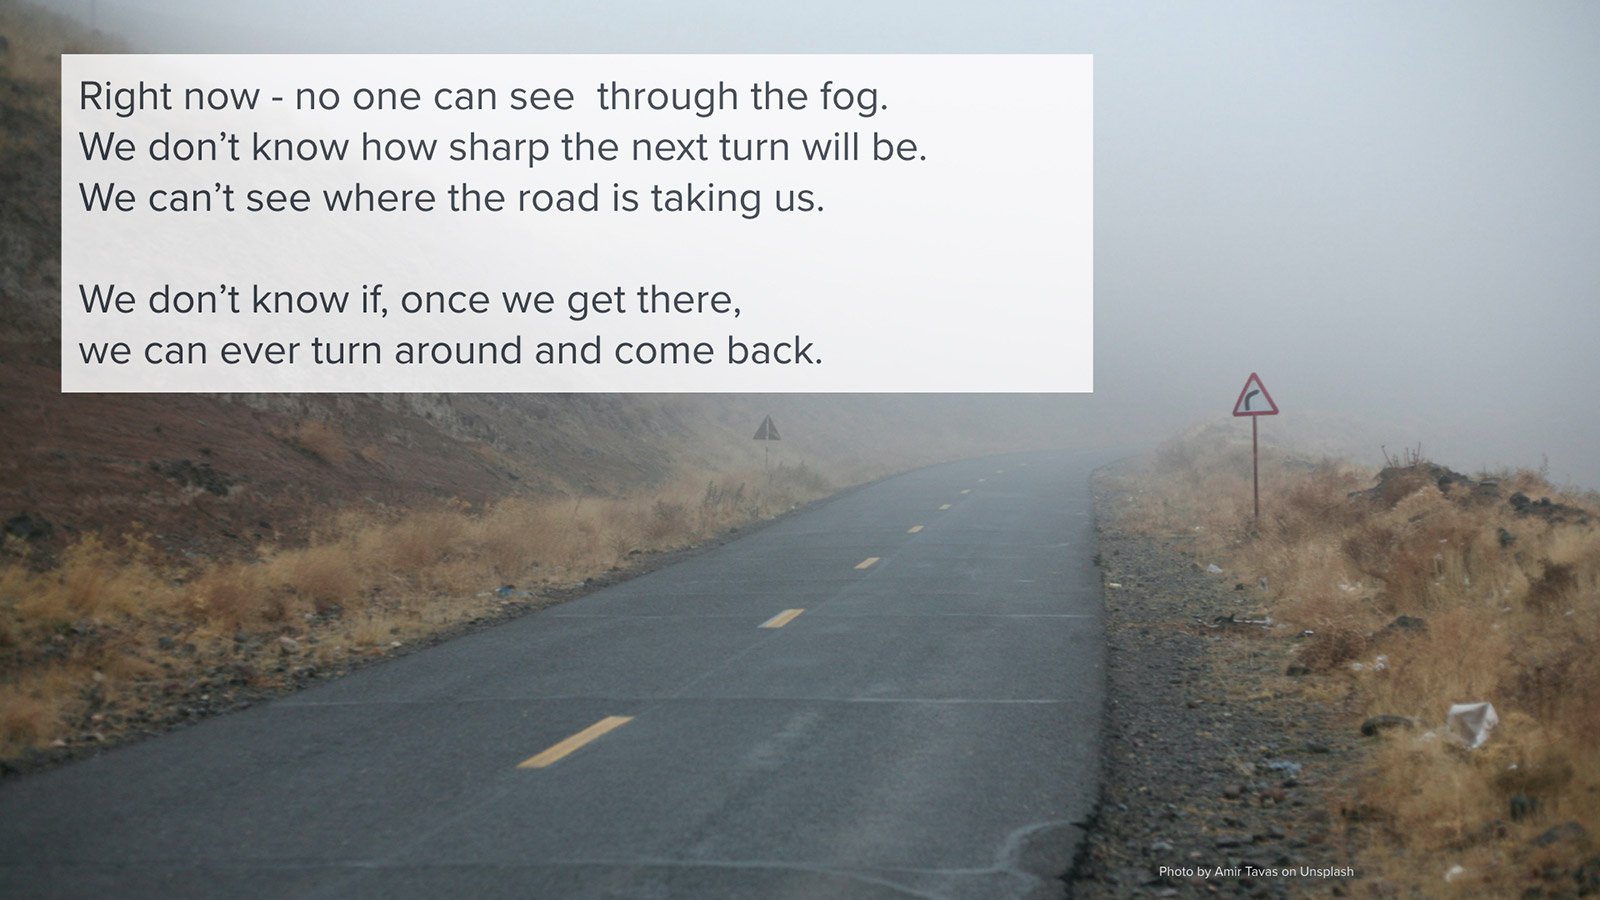 Right now - no one can see through the fog. We don’t know how sharp the next turn will be. We can’t see where the road is taking us. We don’t know if, once we get there, we can ever turn around and come back.